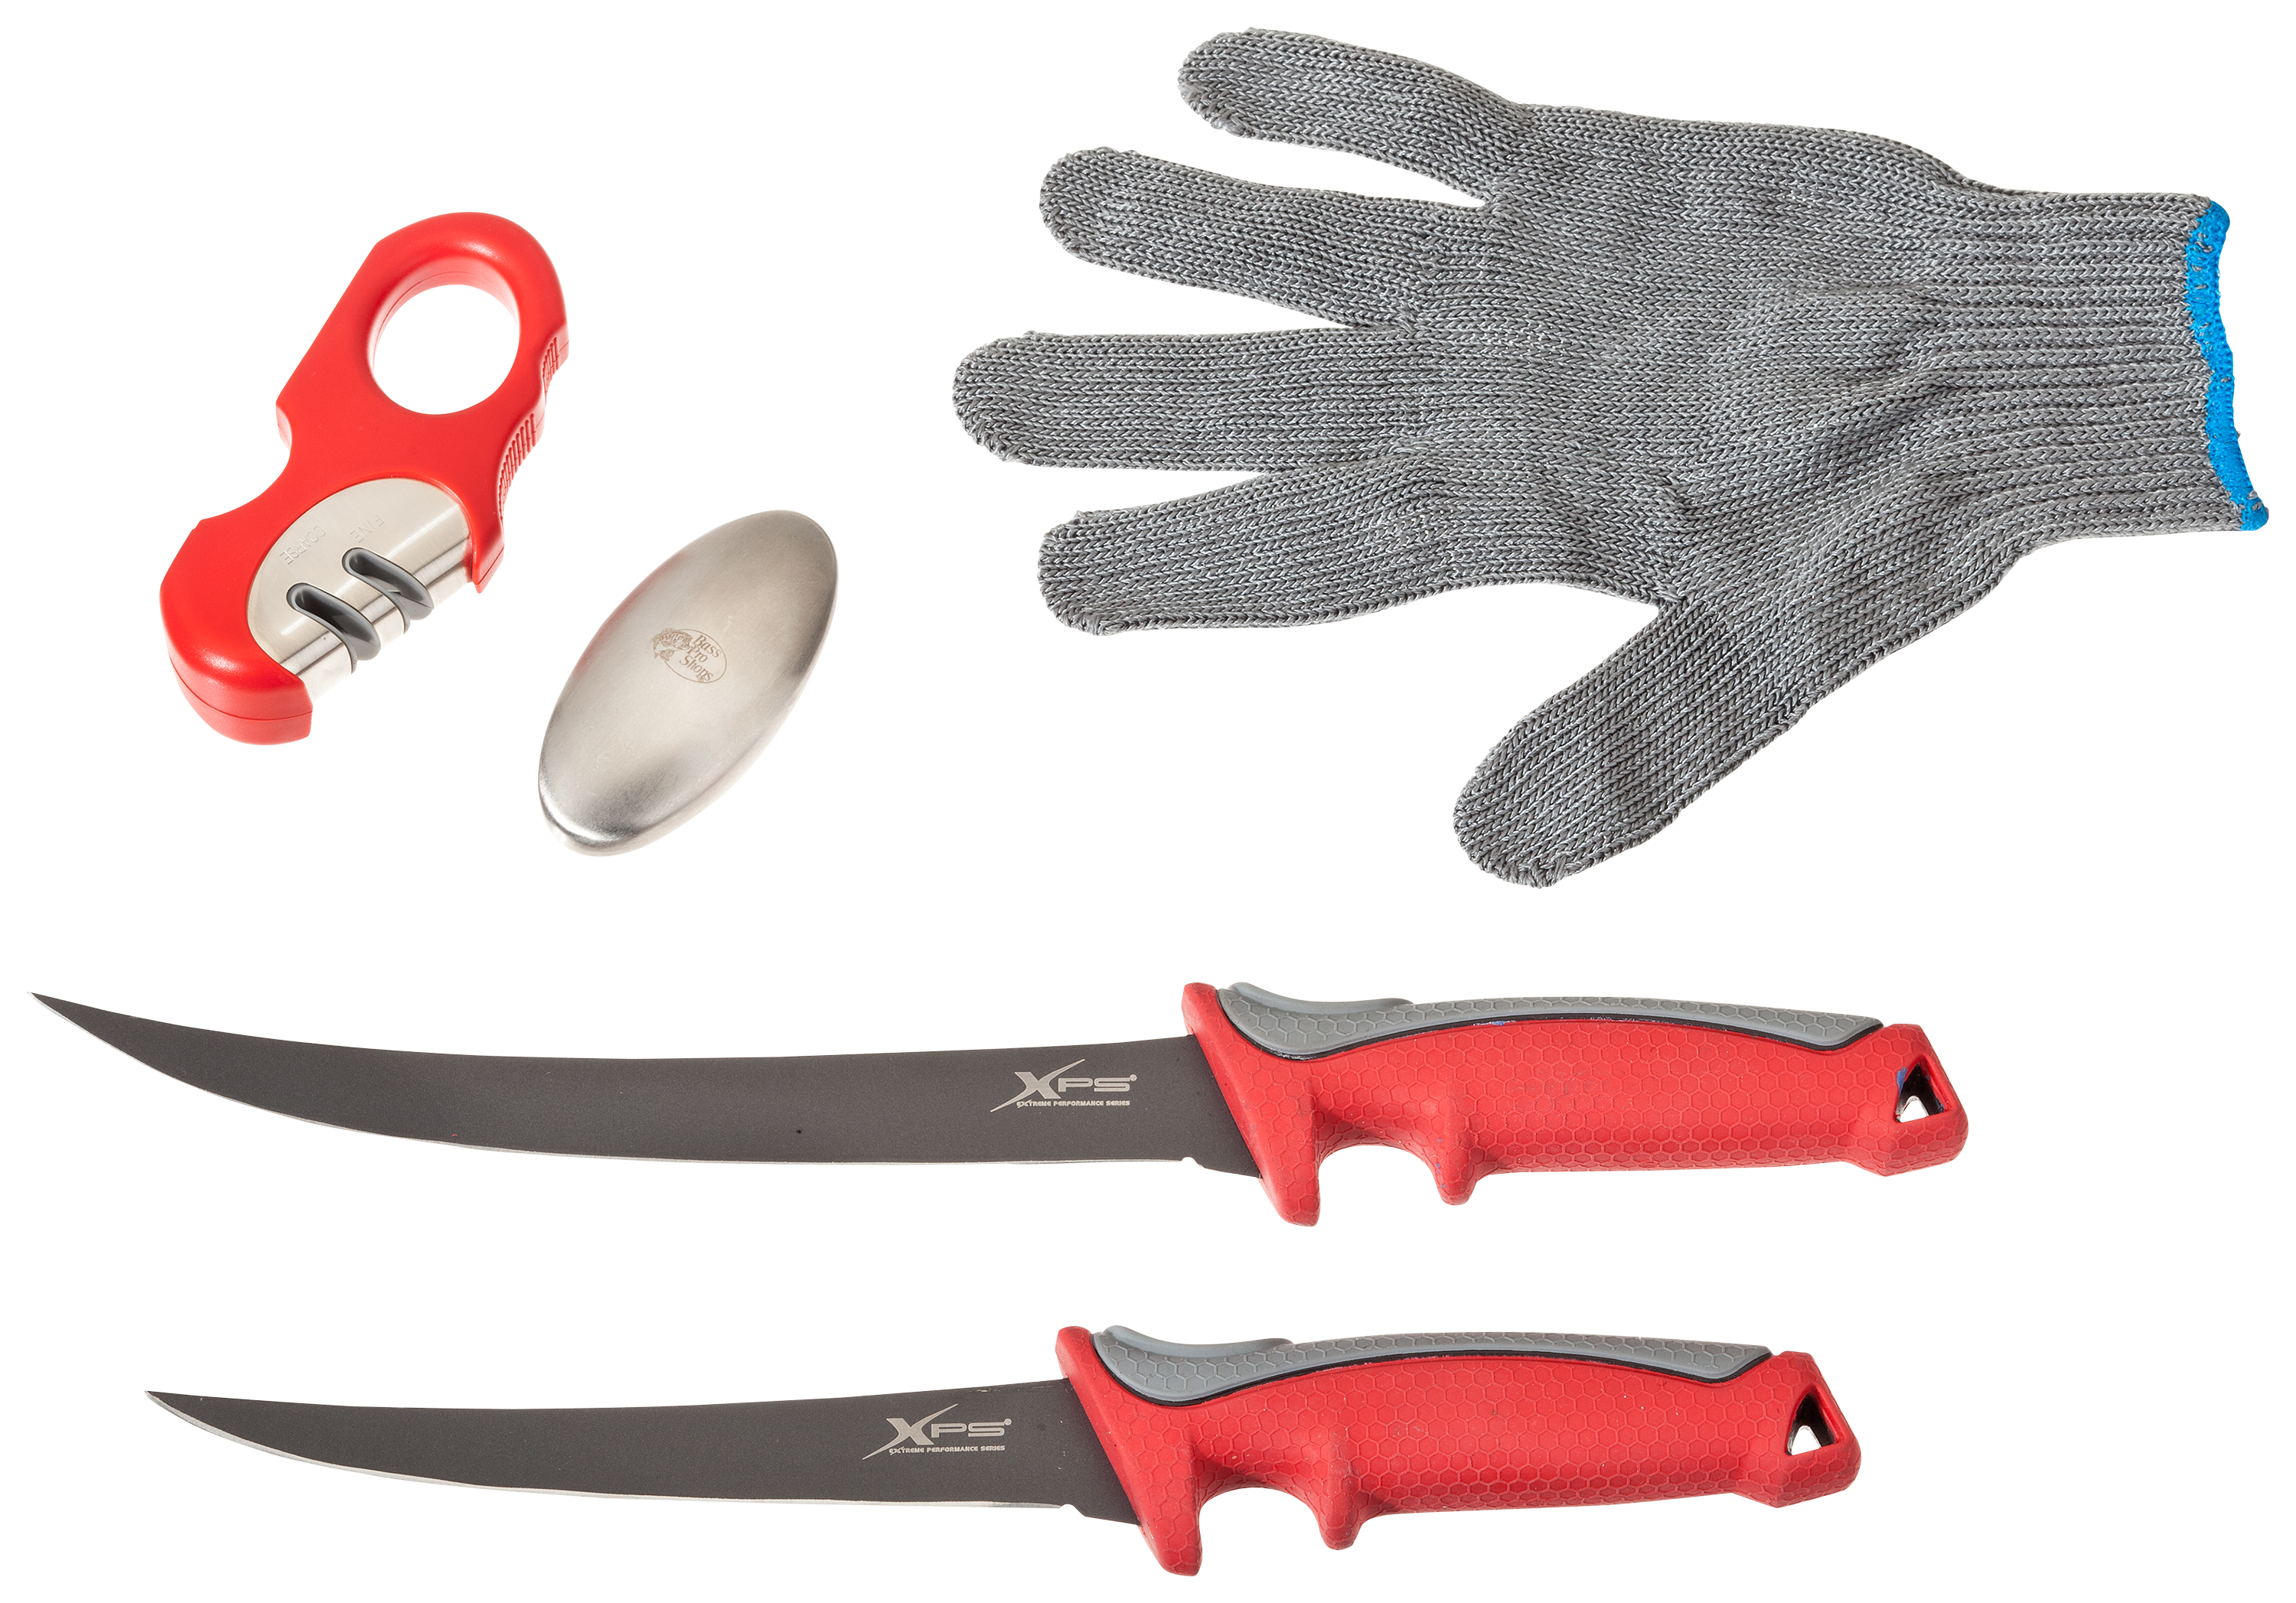 ACTIVE: Watersports & Fishing - Knives & Tools - cutting-accessories